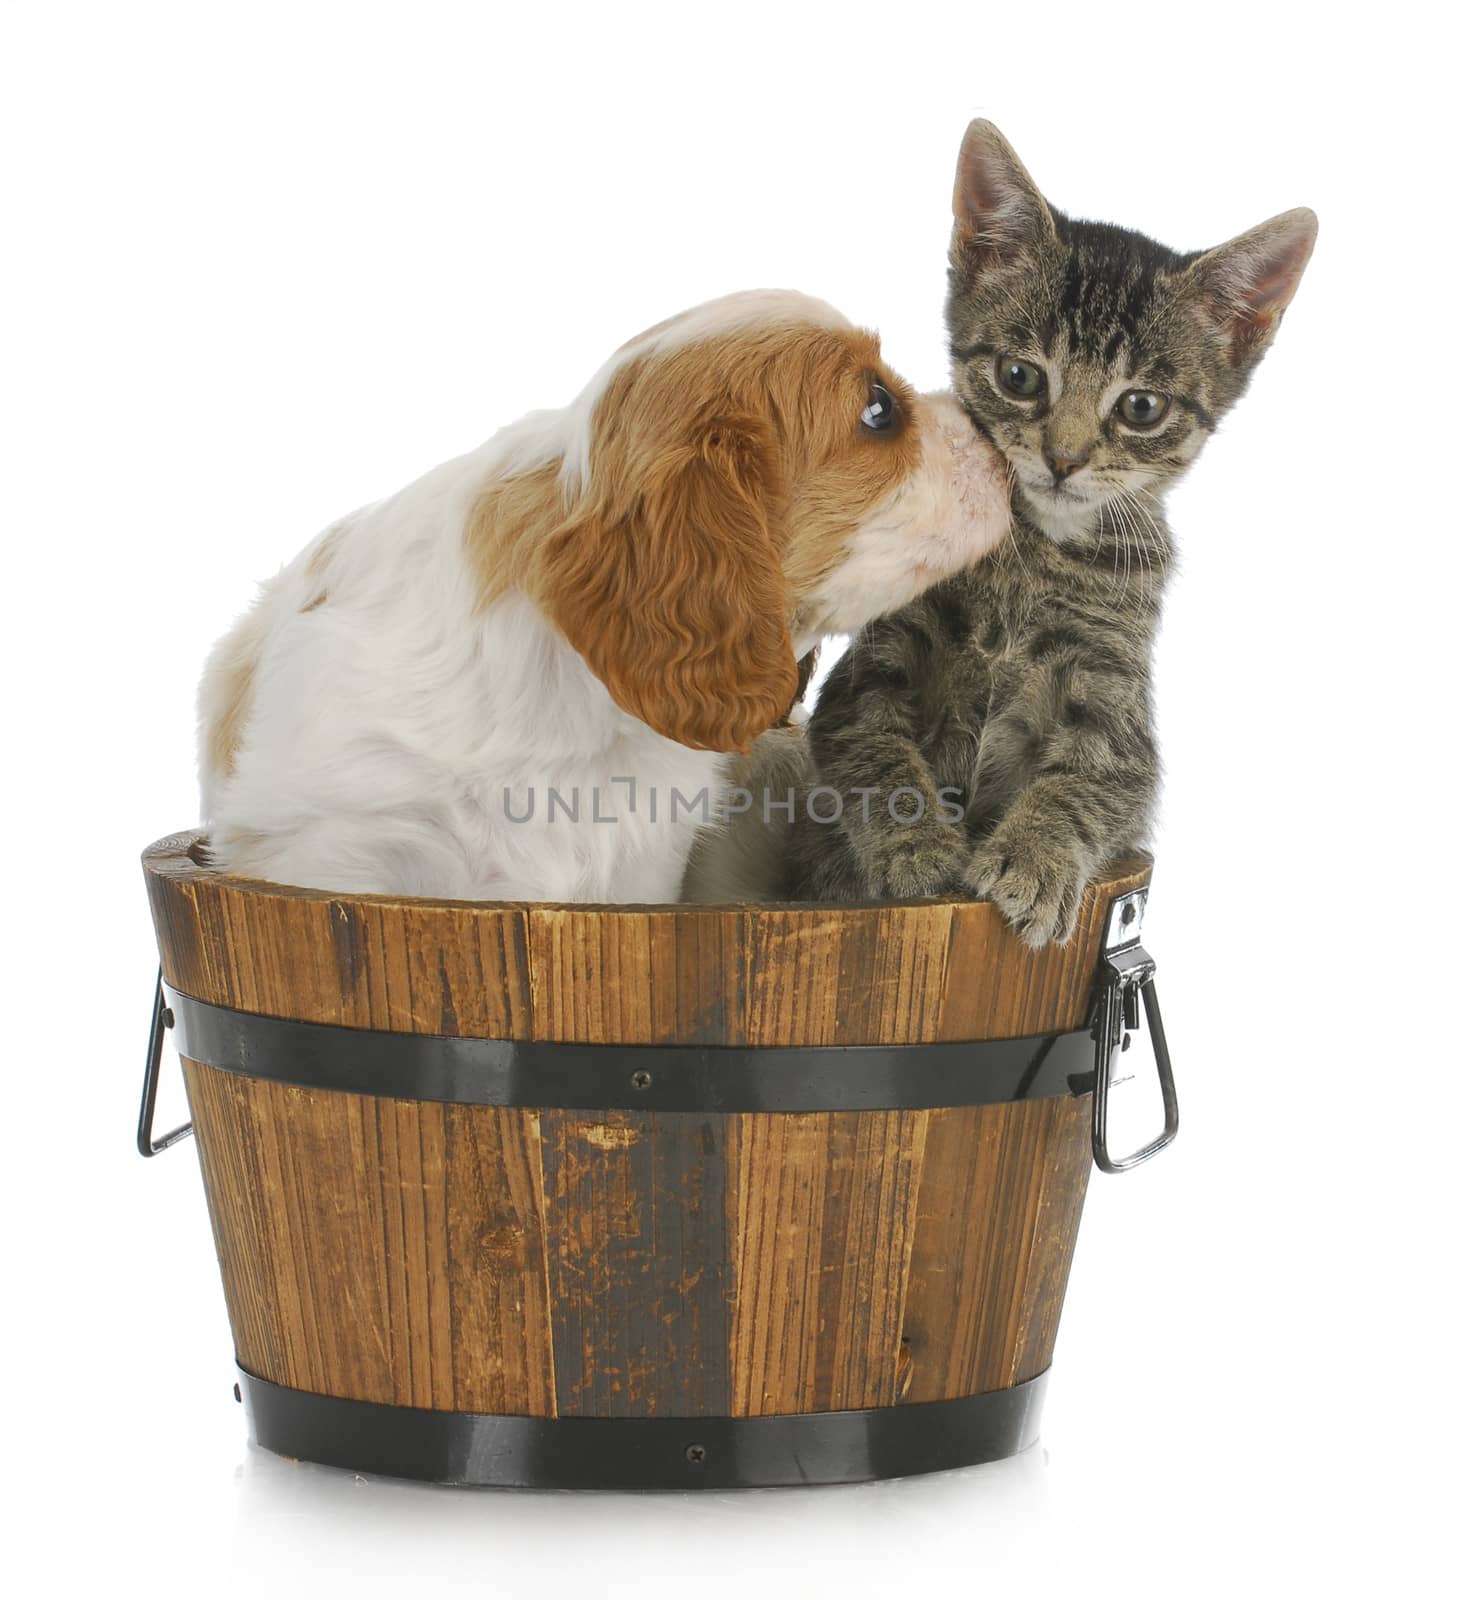 cute puppy and kitten sitting in wooden bucket on white background